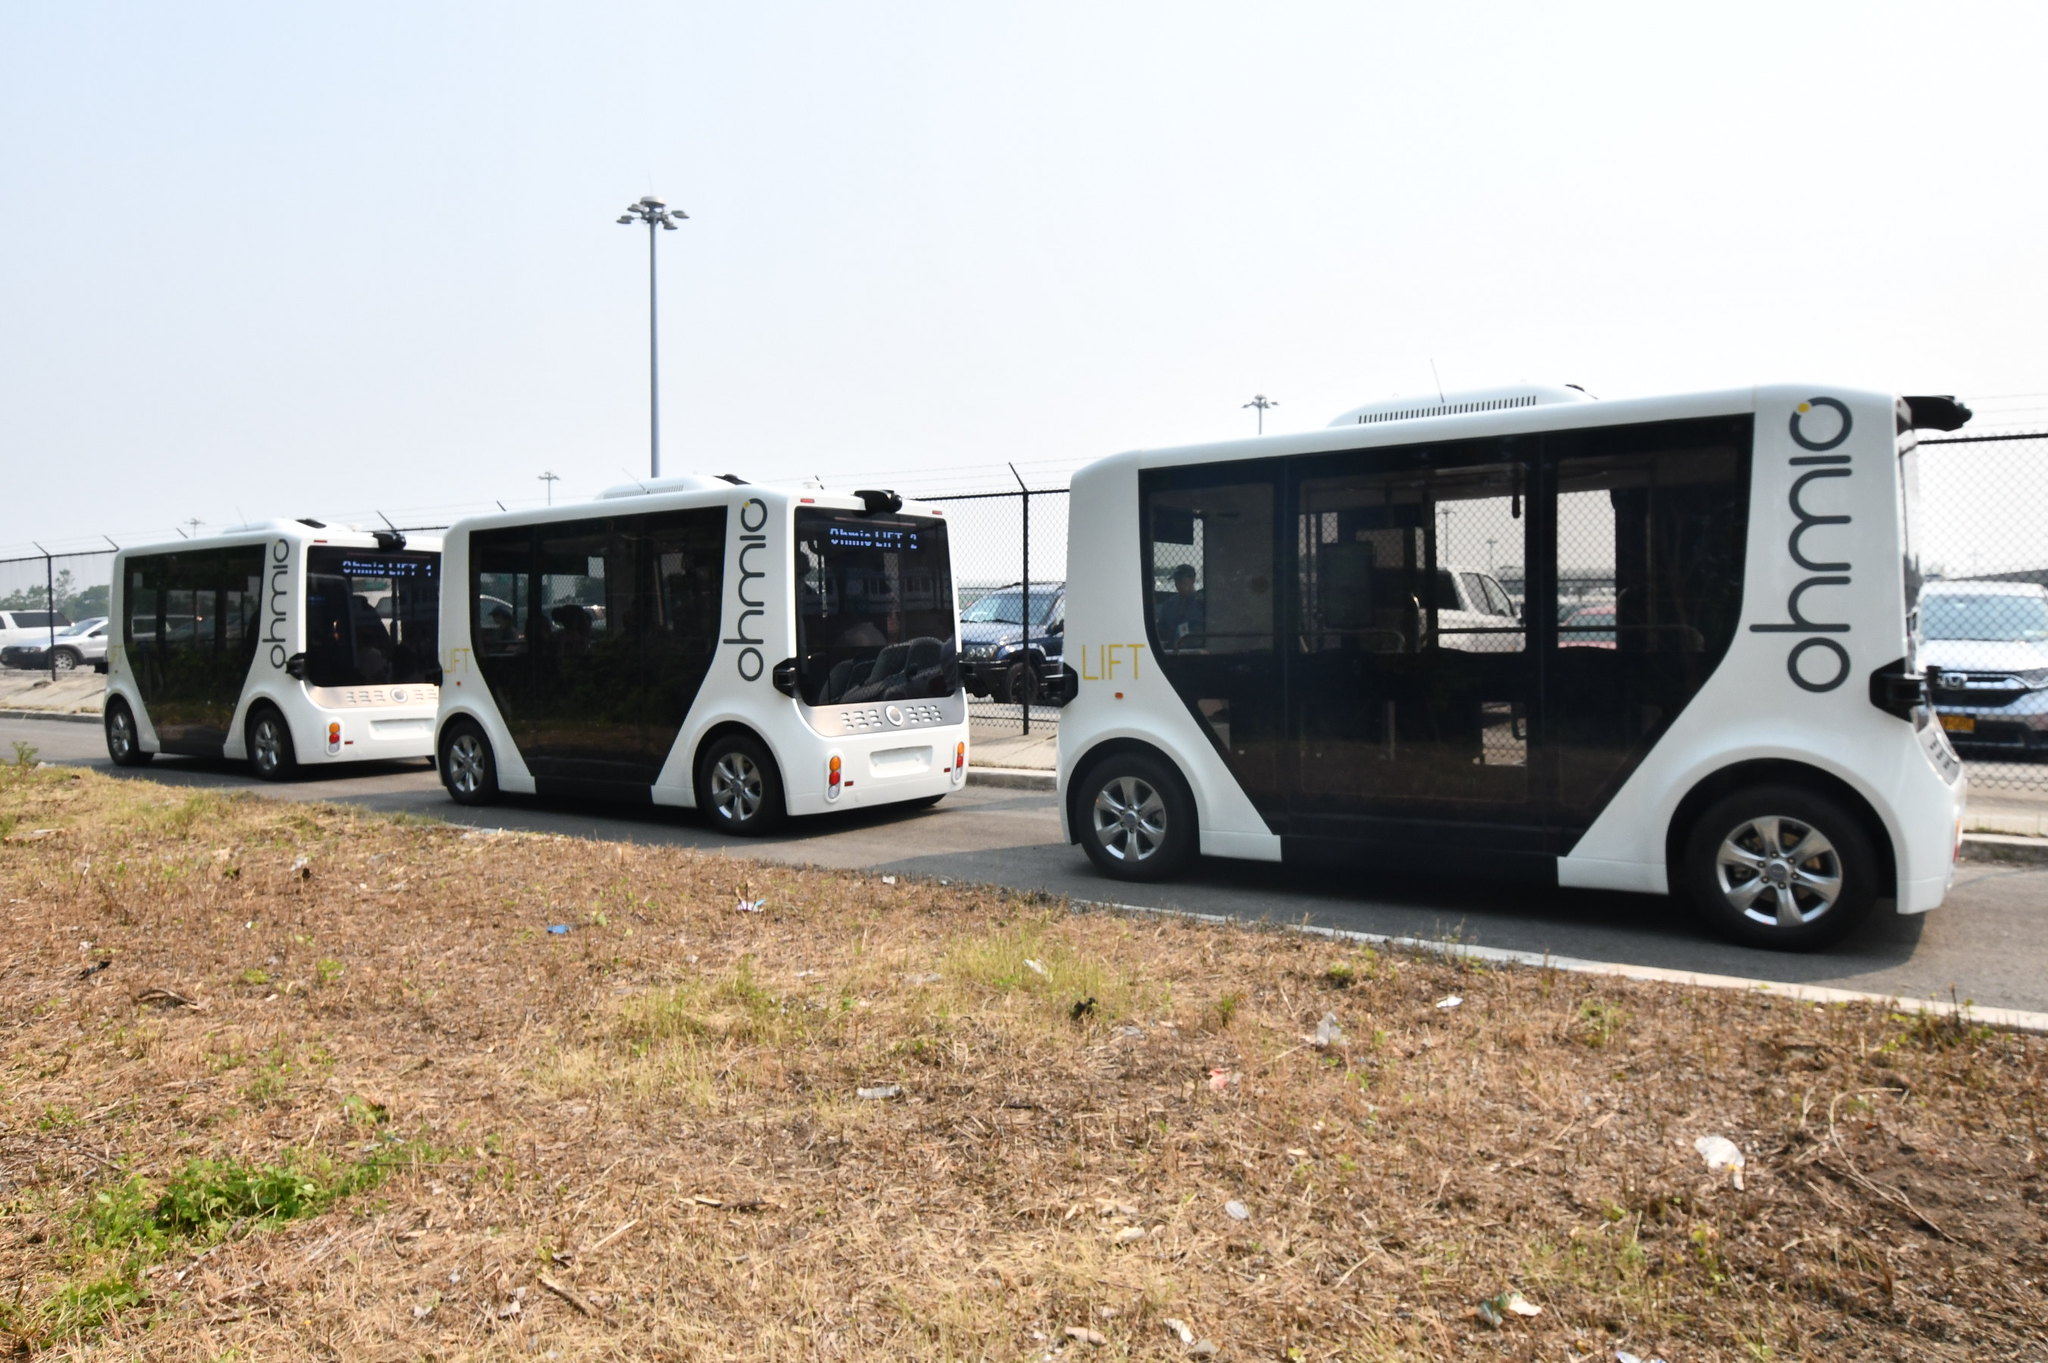 A three-vehicle autonomous platoon on a closed road within a parking lot at John F. Kennedy International Airport